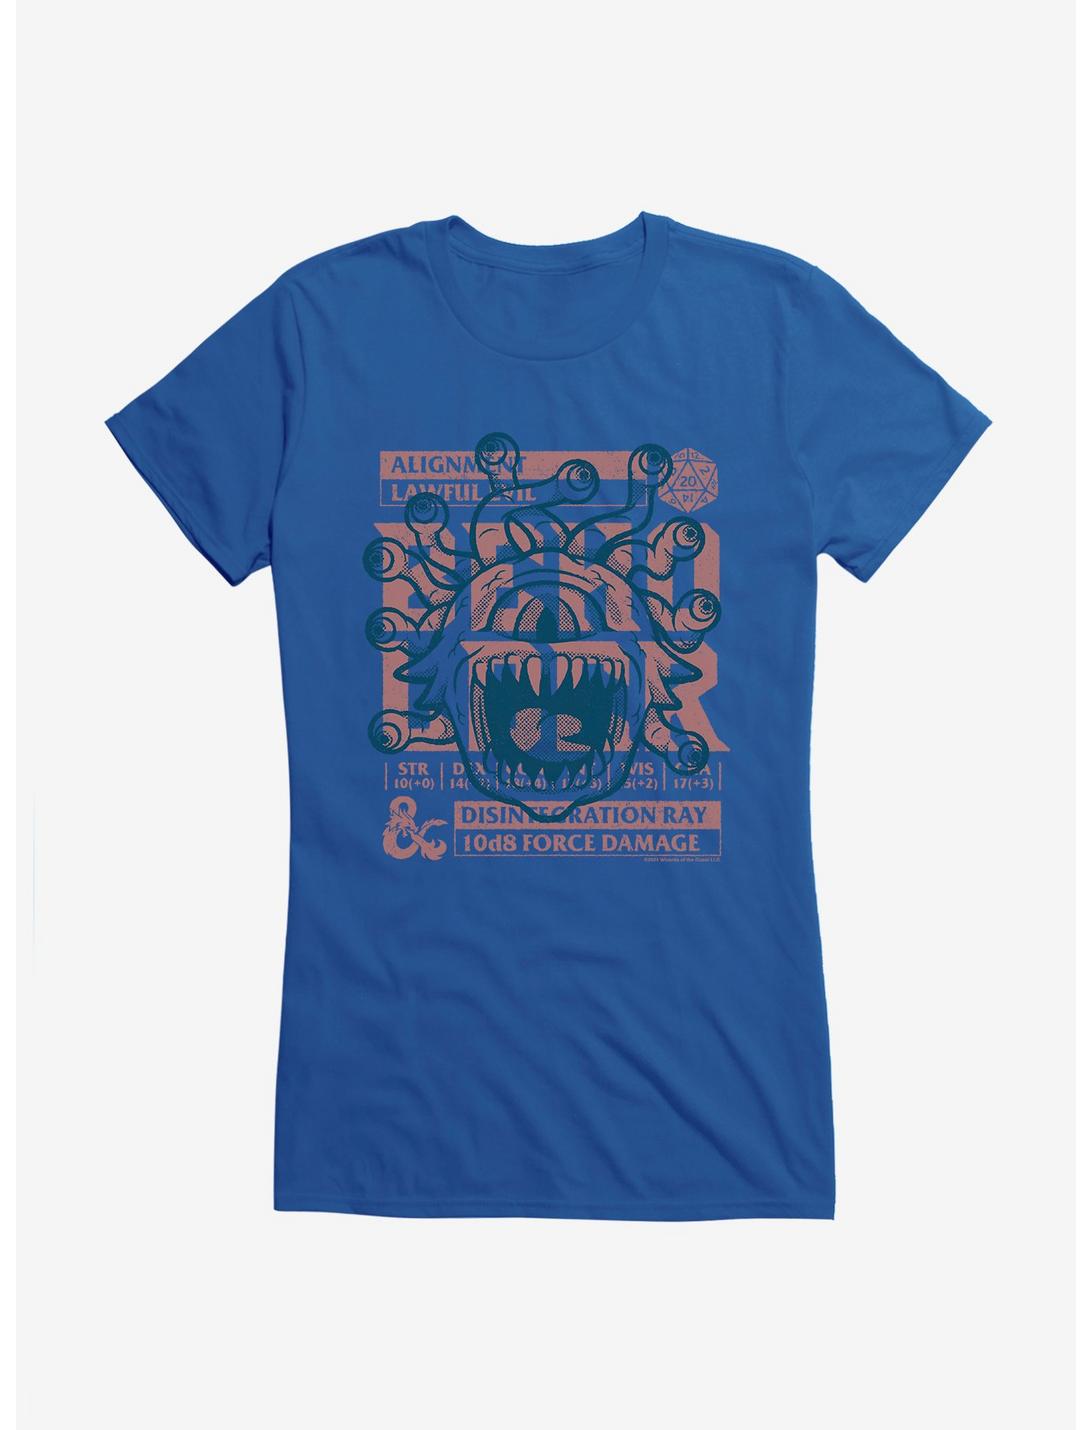 Dungeons & Dragons Disentegration Ray Retro Competition Cards Girls T-Shirt, ROYAL, hi-res